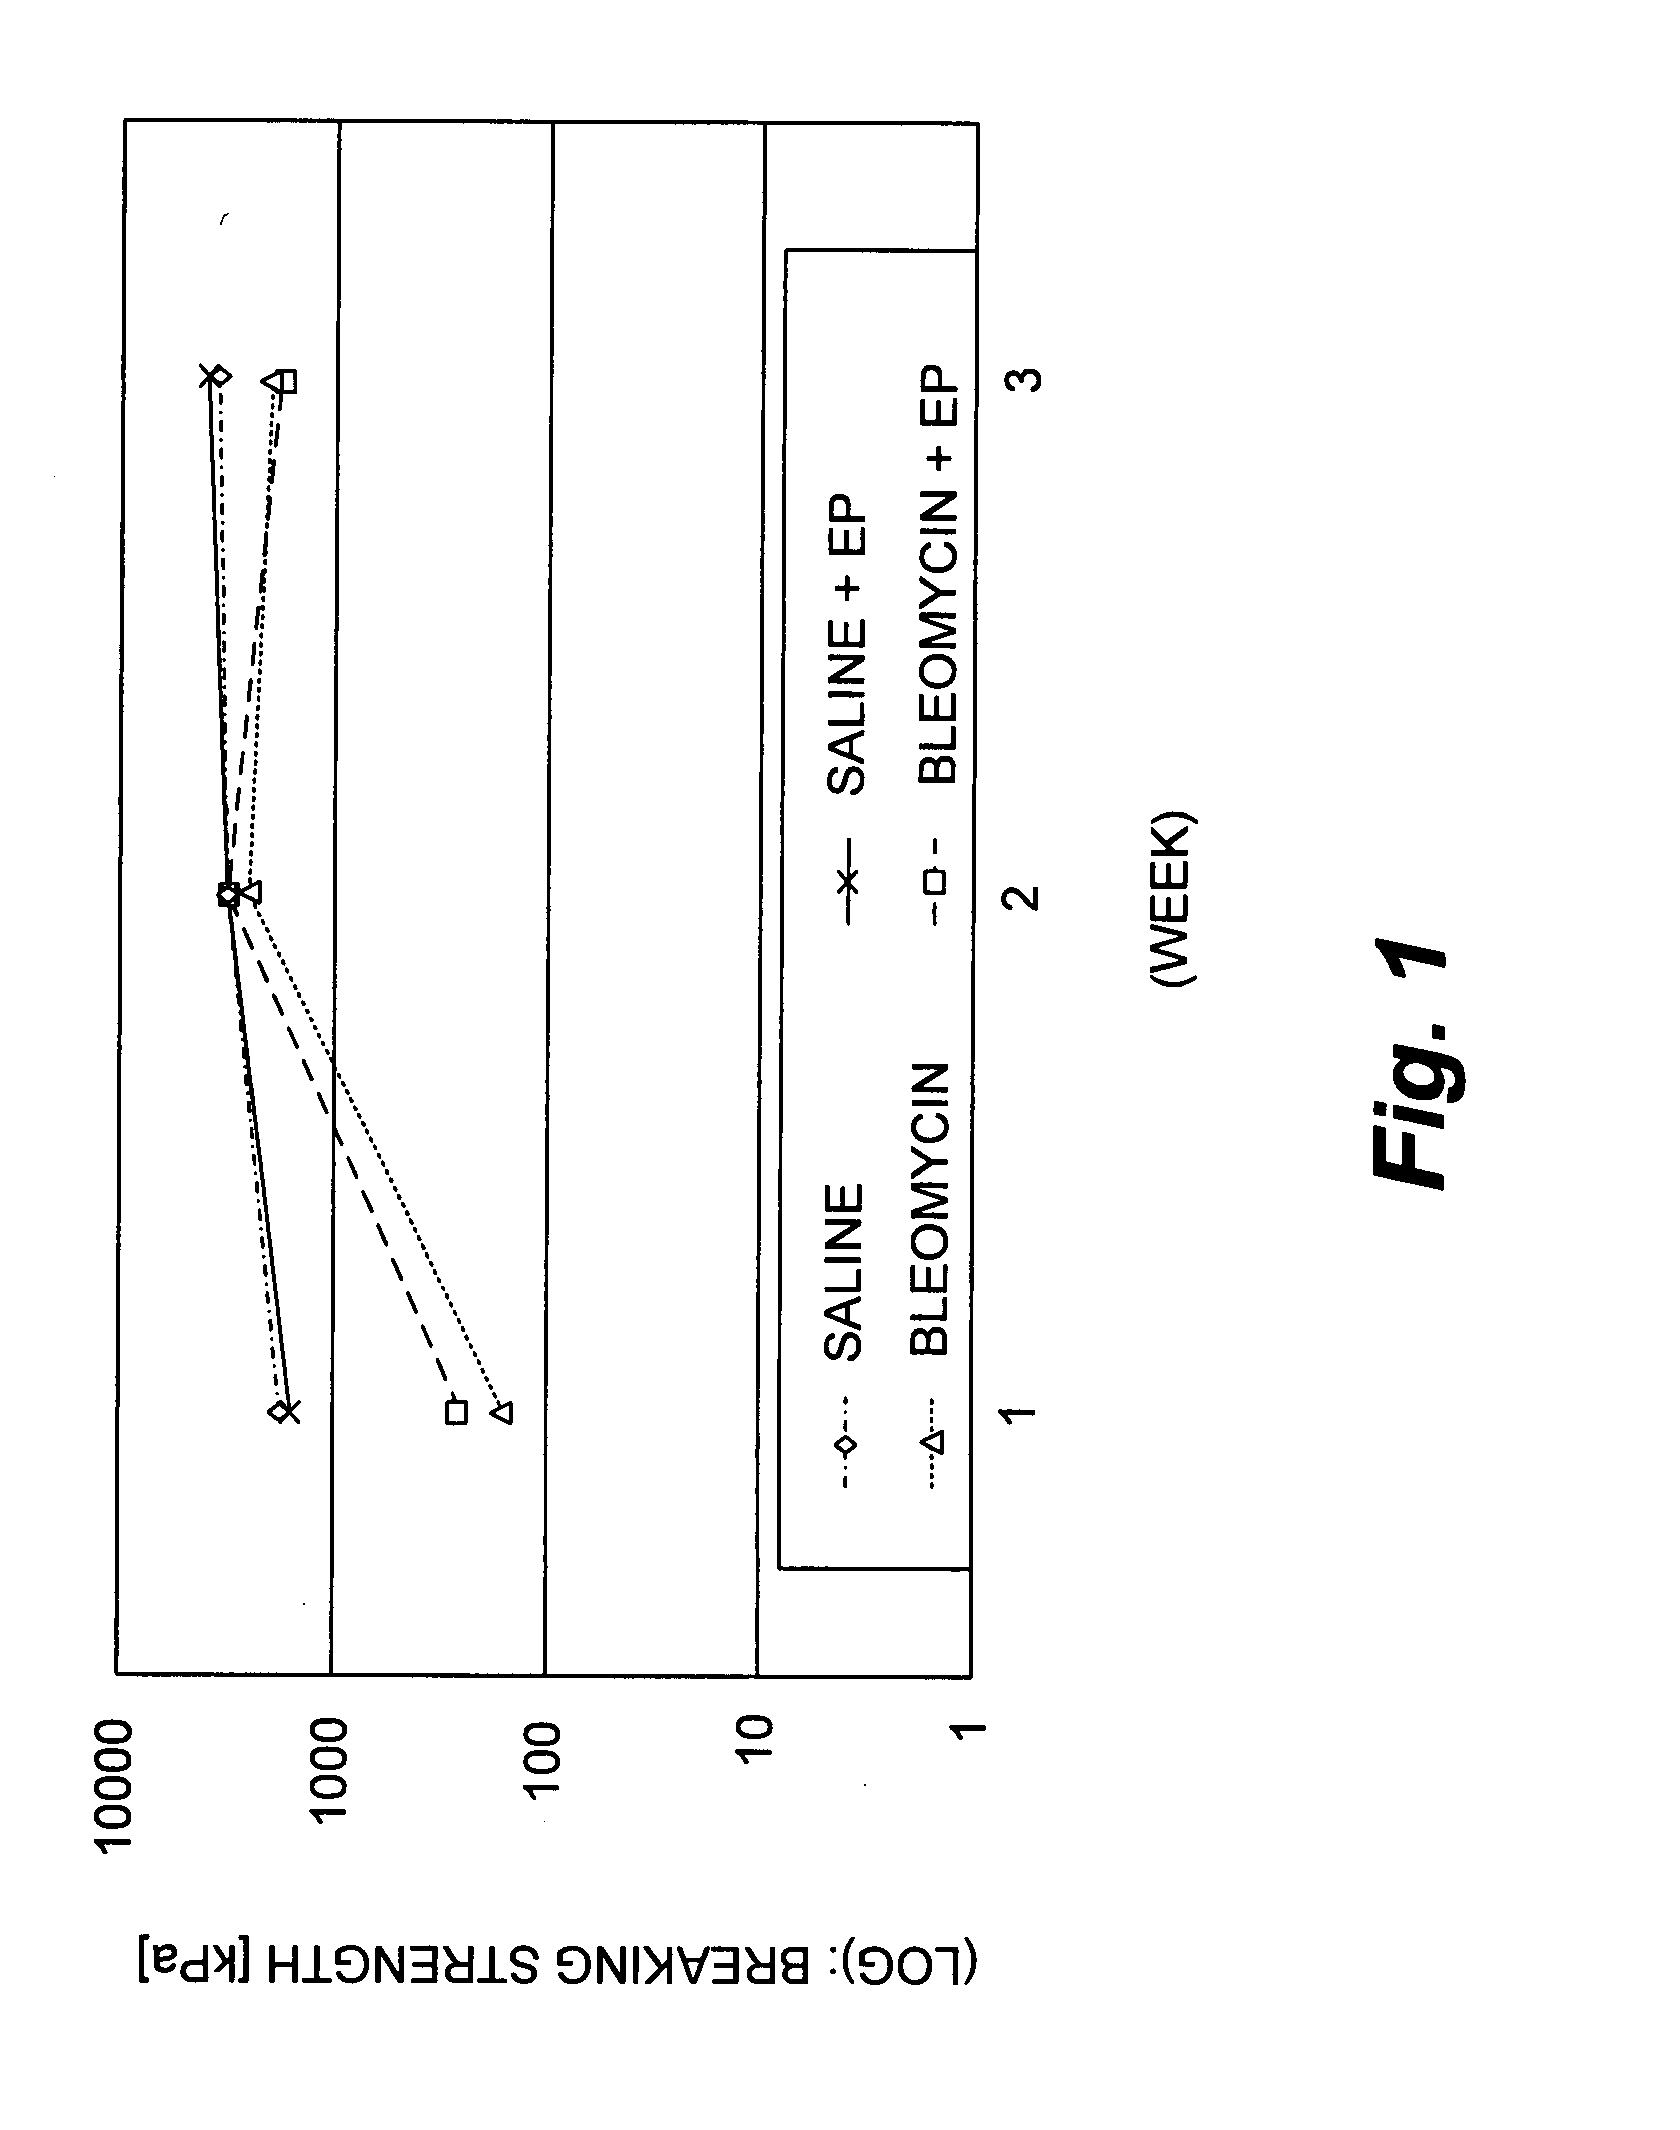 Method and device for treating microscopic tumors remaining in tissues following surgical resection